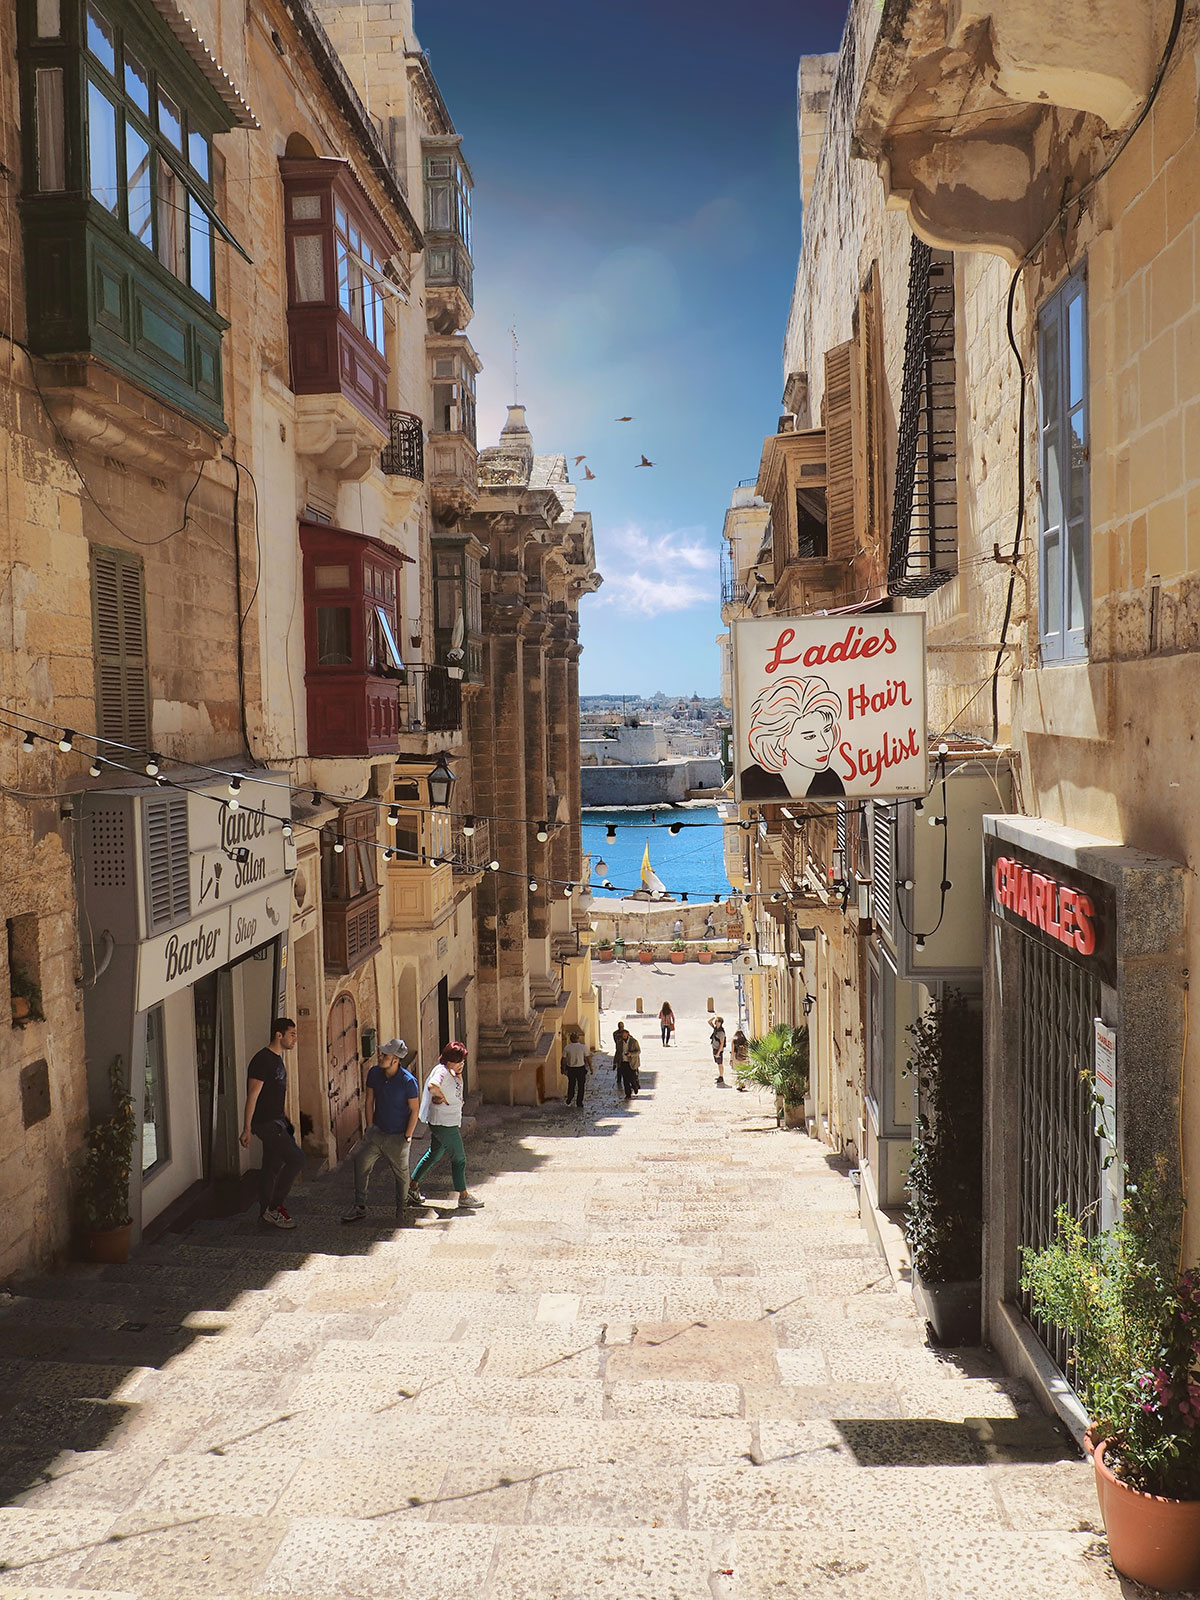 Buying Cannabis In Malta and Gozo